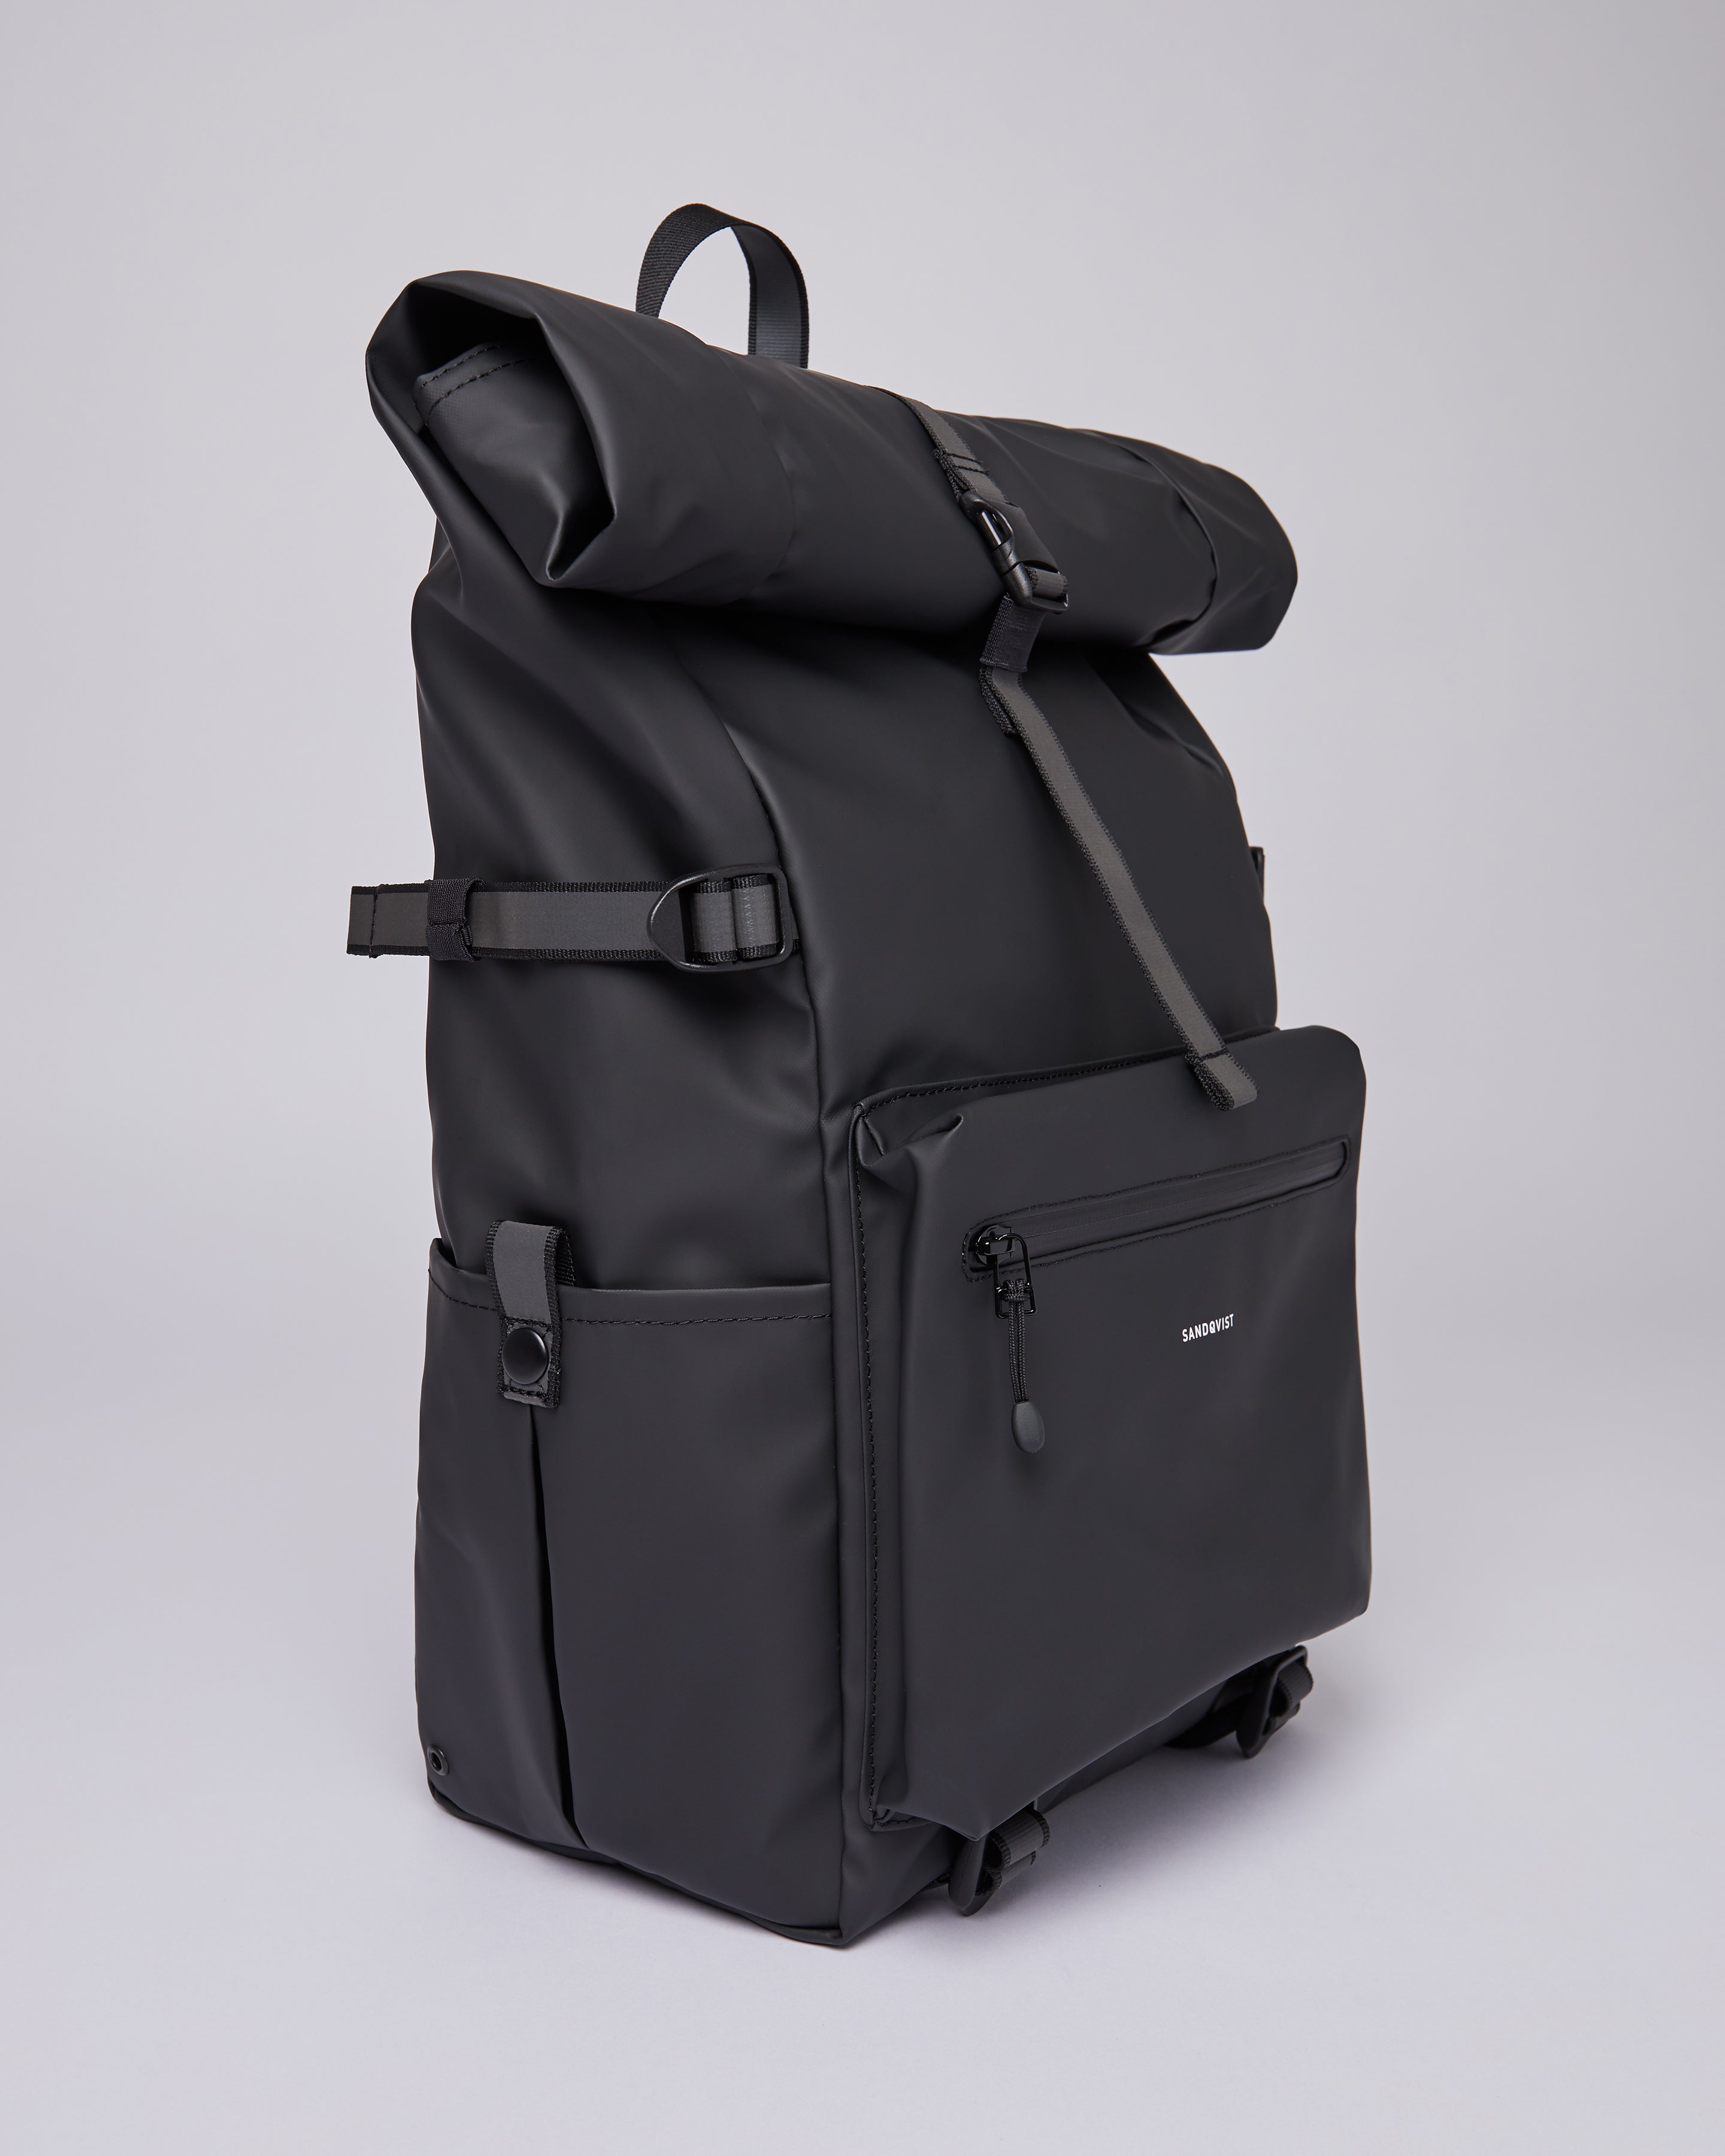 Sandqvist Ruben 2.0 Backpack in Black SQA1609 | Shop from eightywingold an official brand partner for Sandqvist Canada and US. 